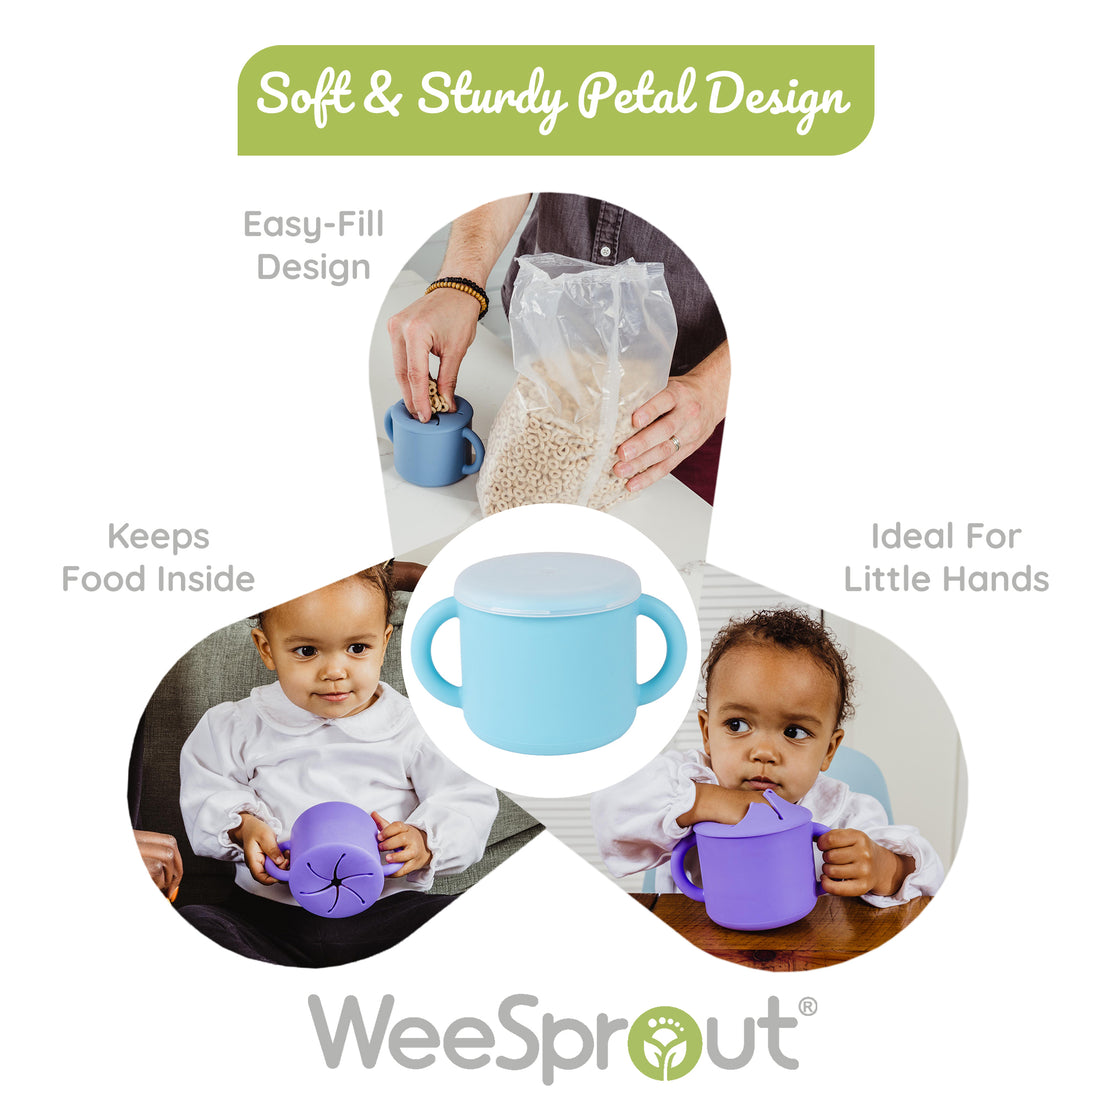 WeeSprout 2-in-1 Drinking Cups for Kids, Durable 304 Stainless Steel Cups, Silicone Straws with Straw Stoppers, Premium Hard Plastic Twist Lids